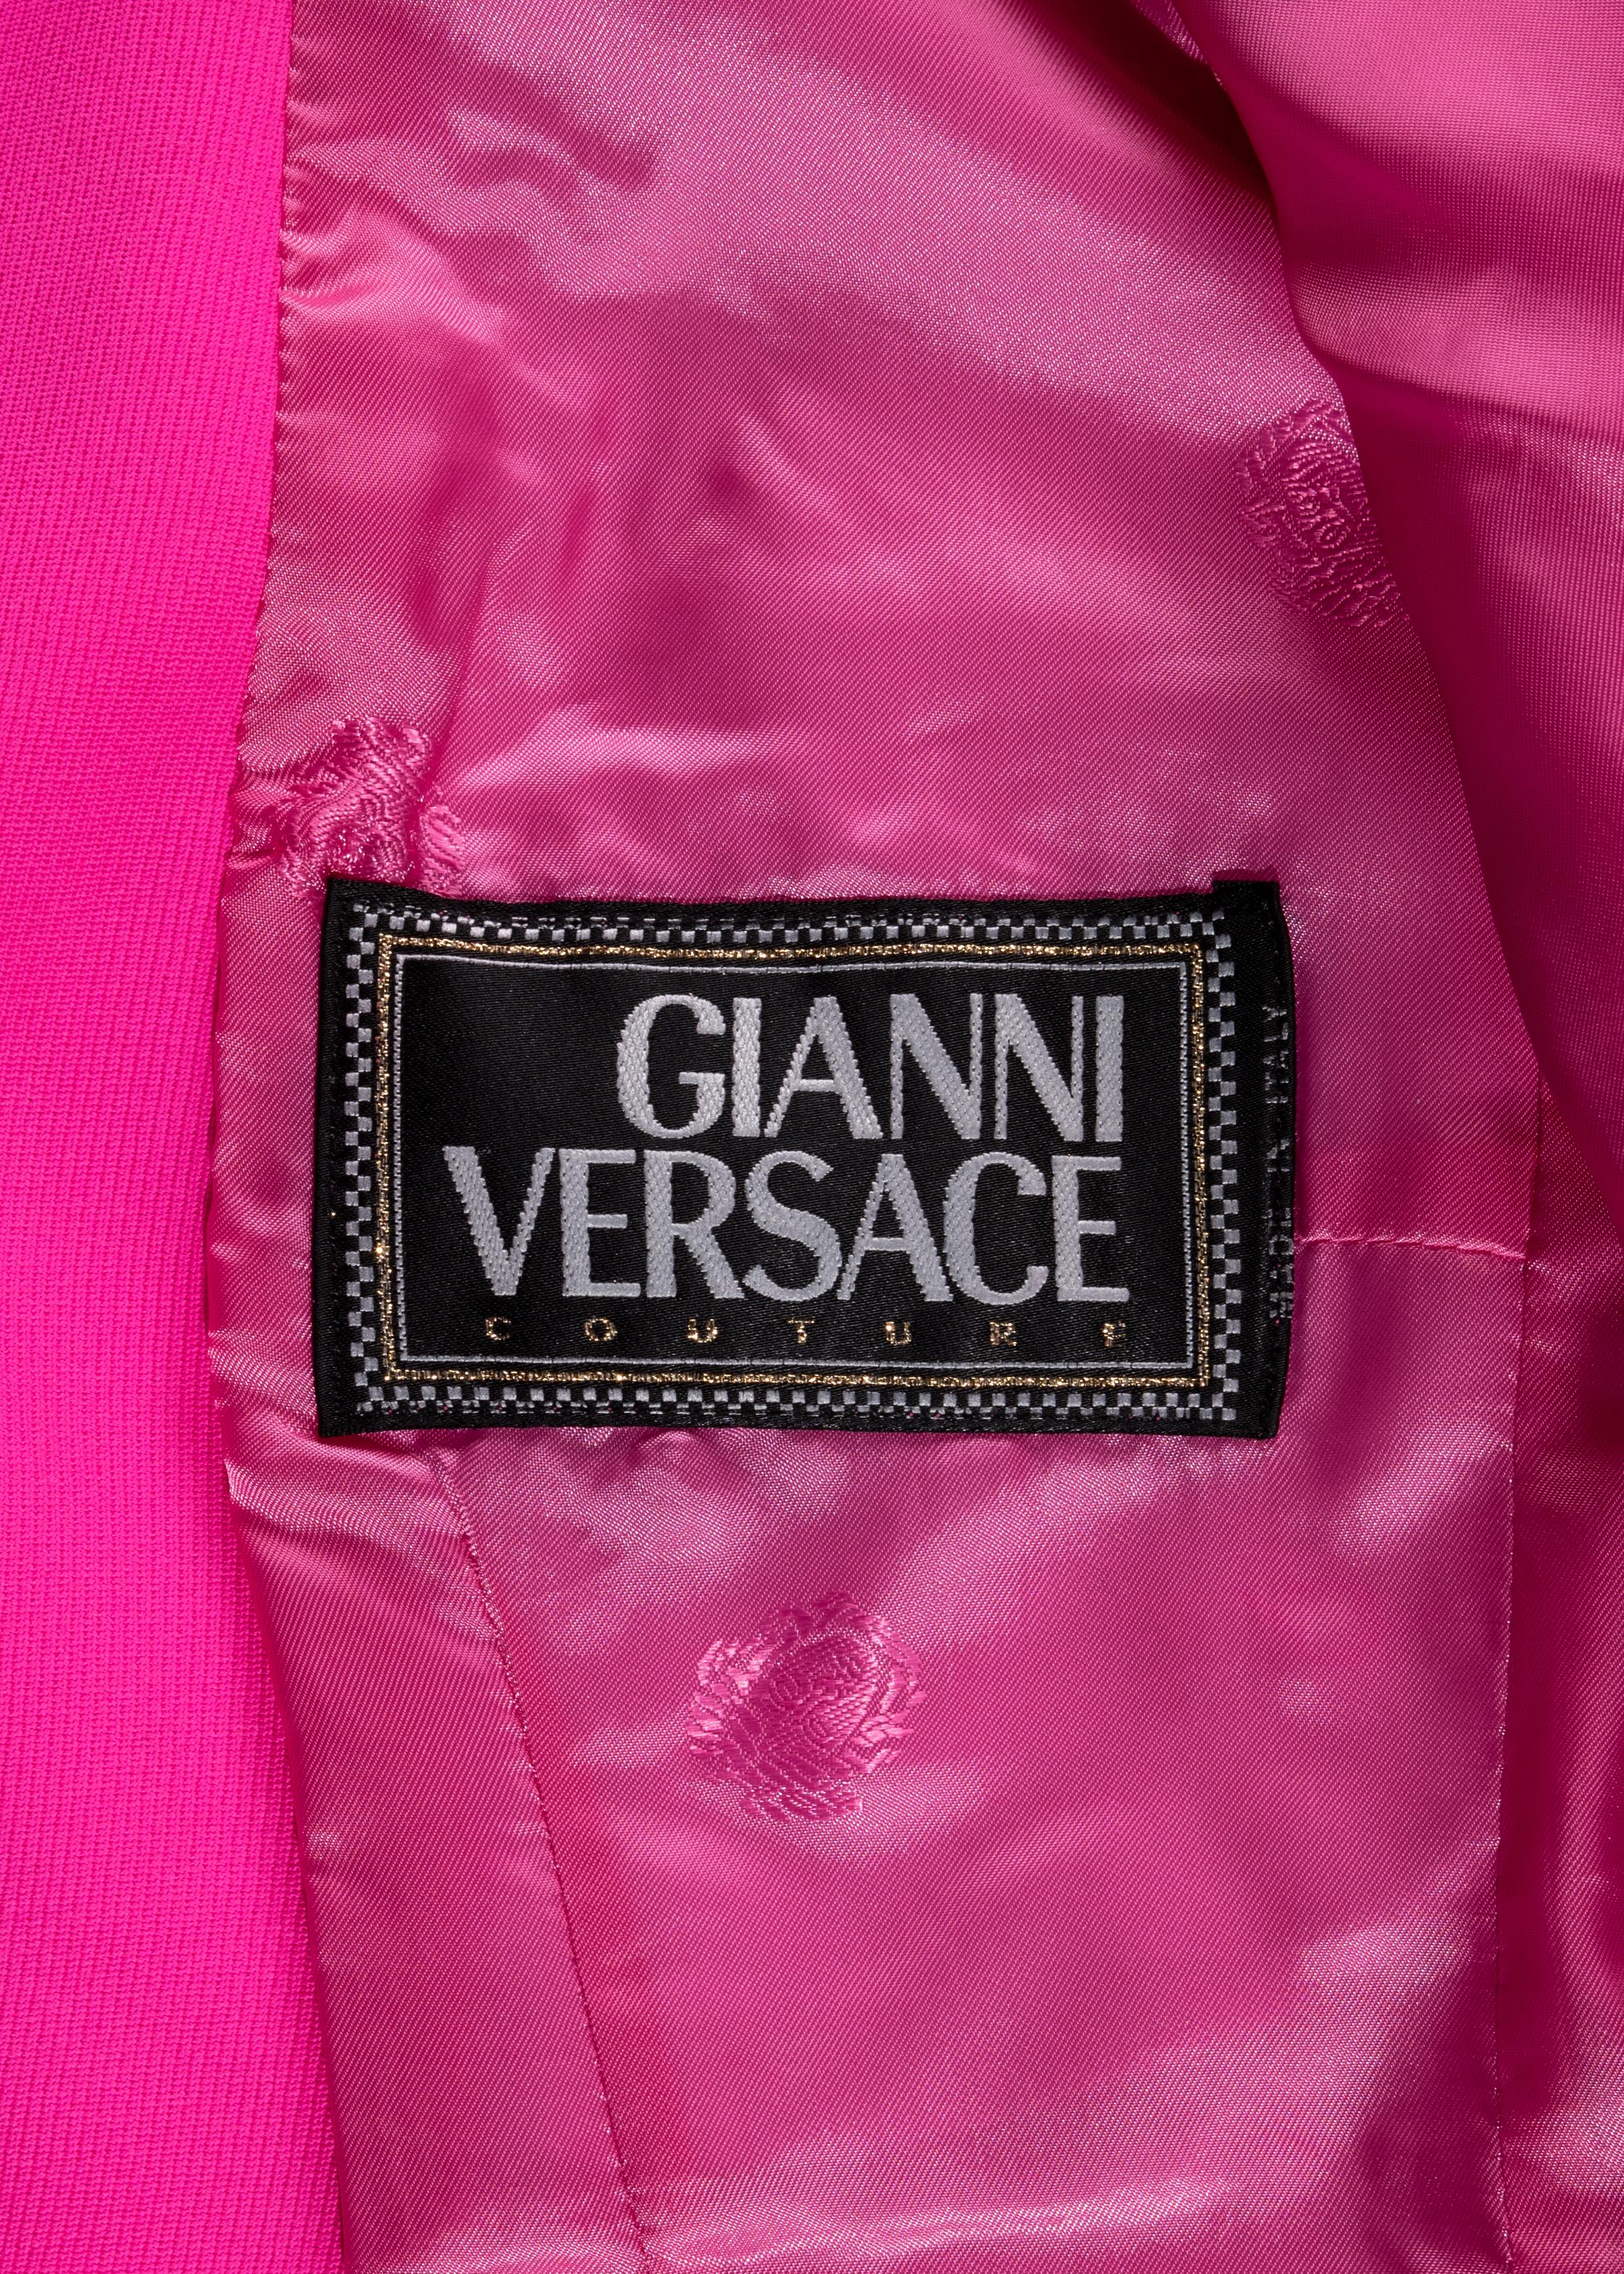 Gianni Versace neon pink wool monochromatic mini skirt suit, fw 1996 For Sale 1